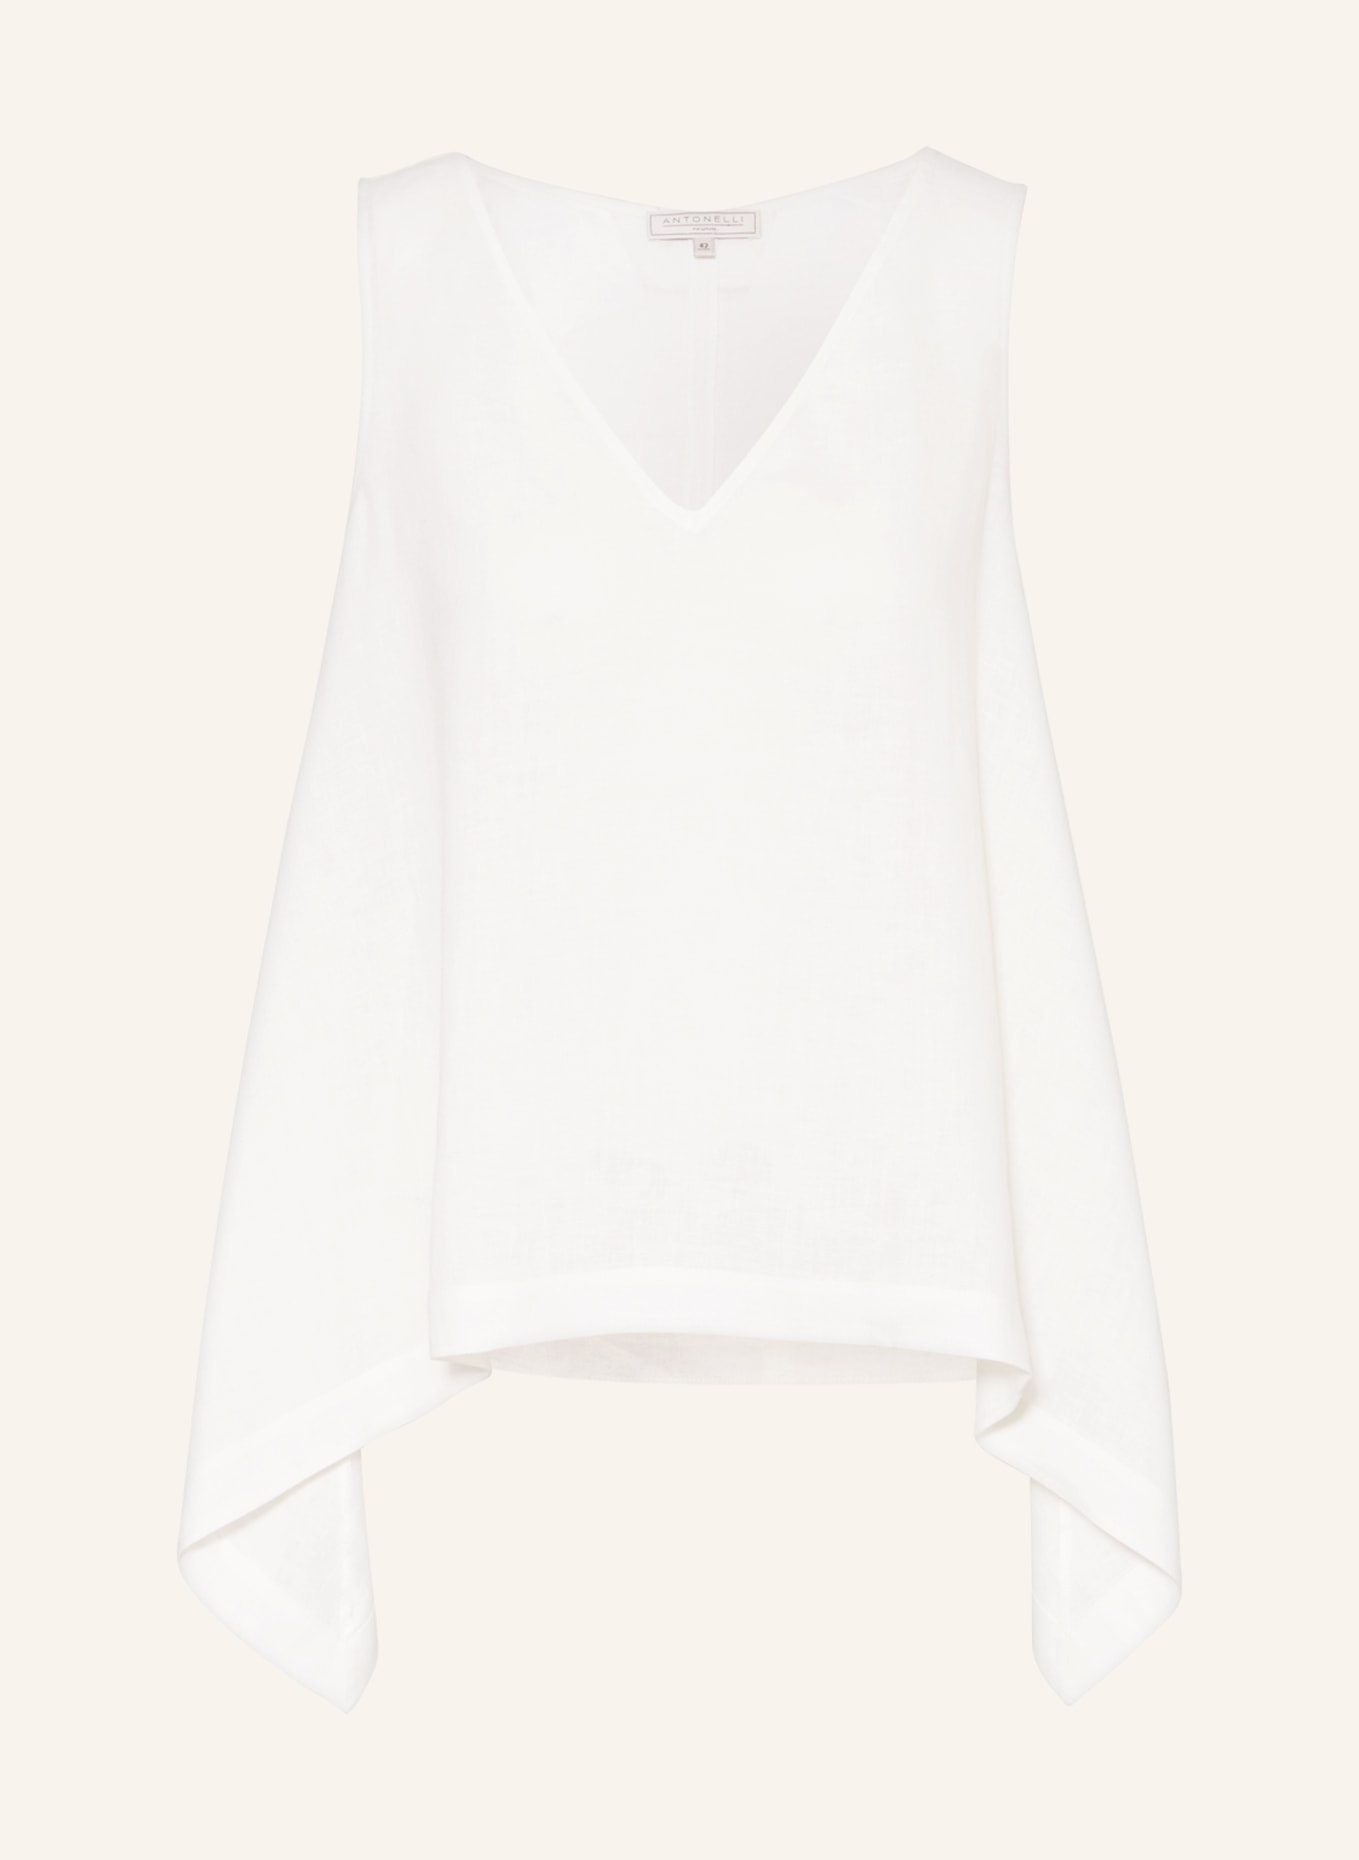 ANTONELLI firenze Blouse top made of linen, Color: WHITE (Image 1)